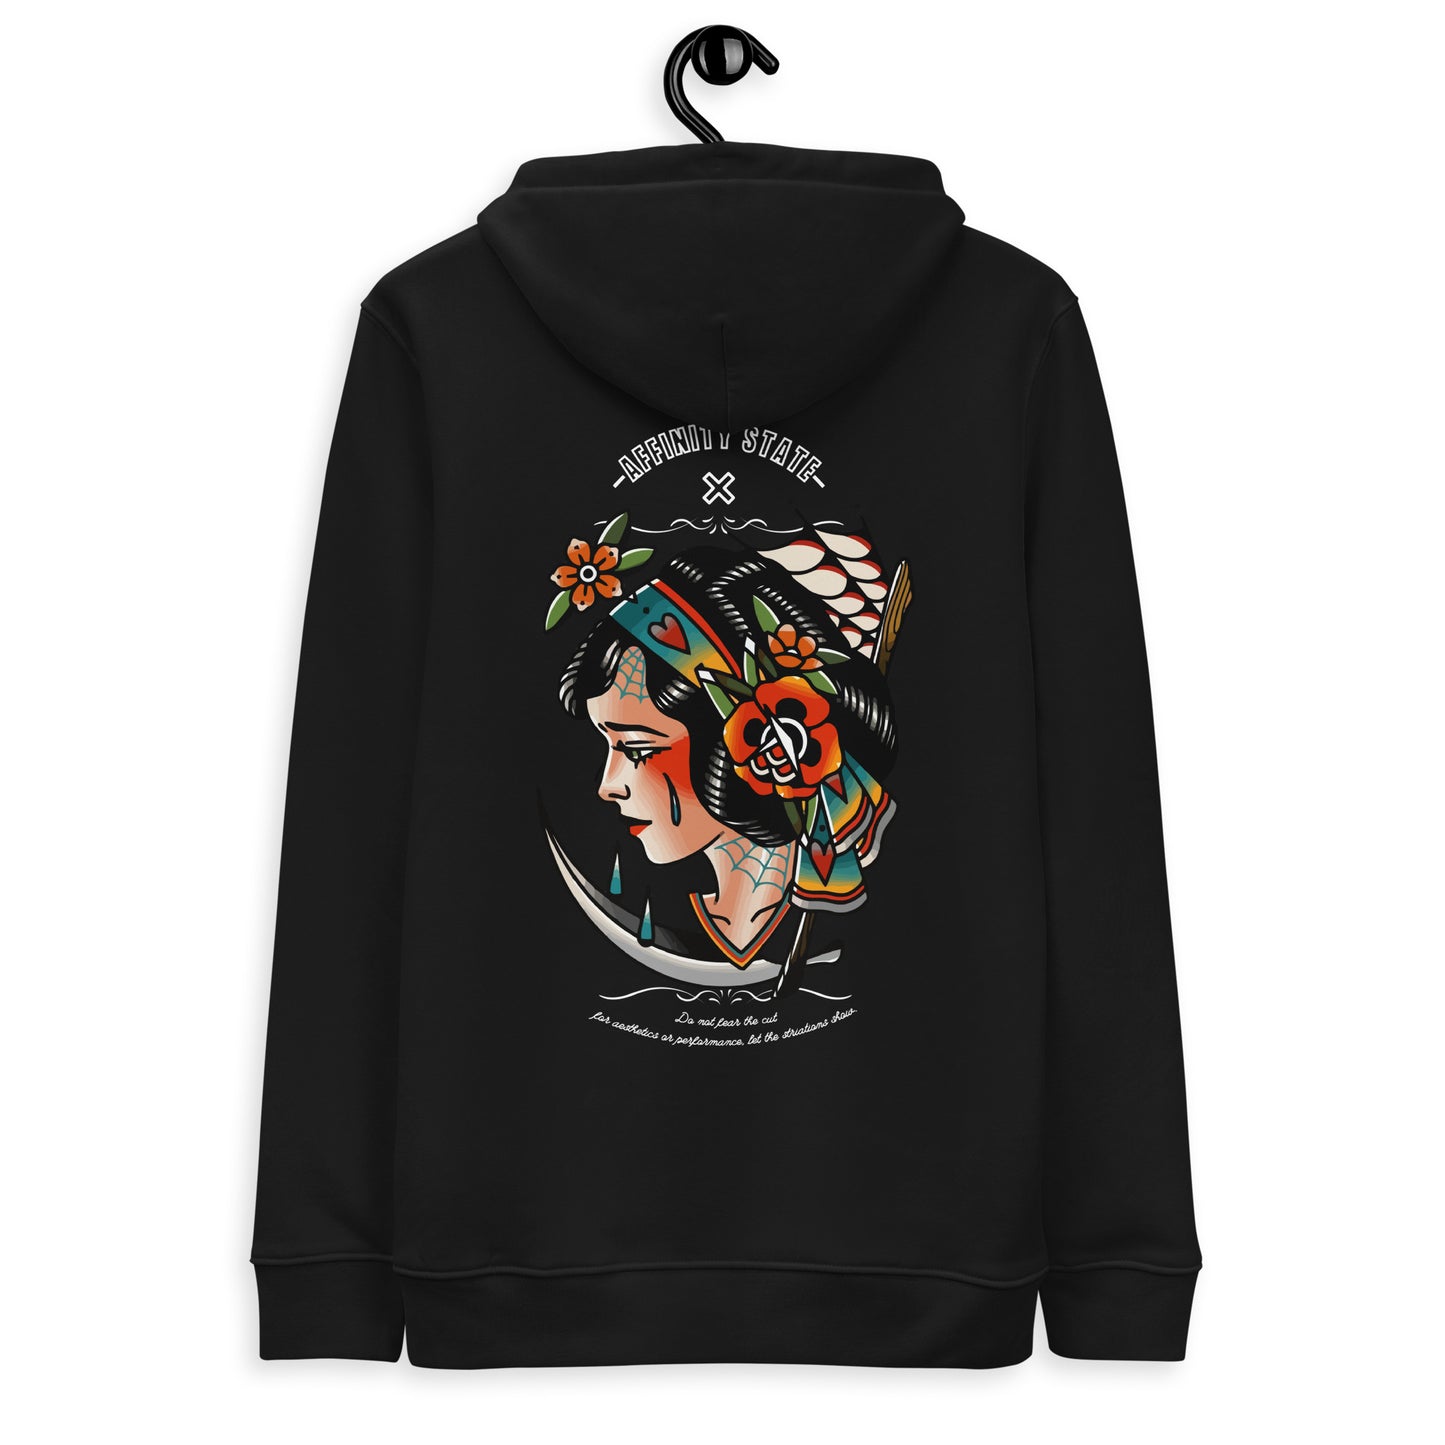 The Cut - Affinity Unisex Embroidered Hoodie